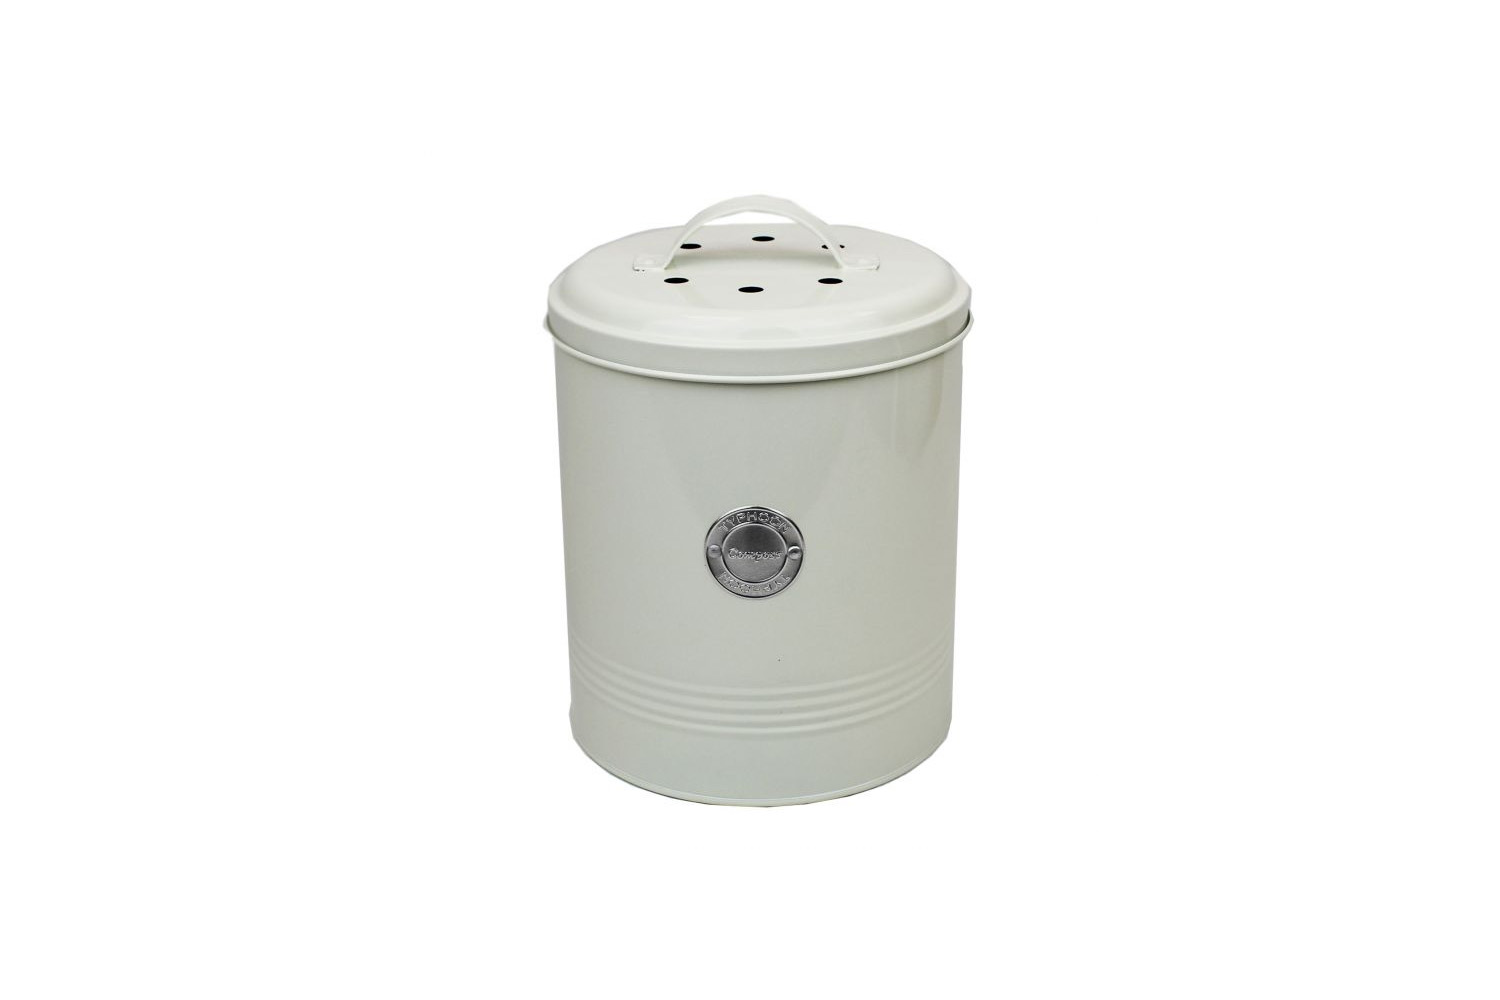 The Living Compost Caddy in Cream is £\17.79 at All Green.